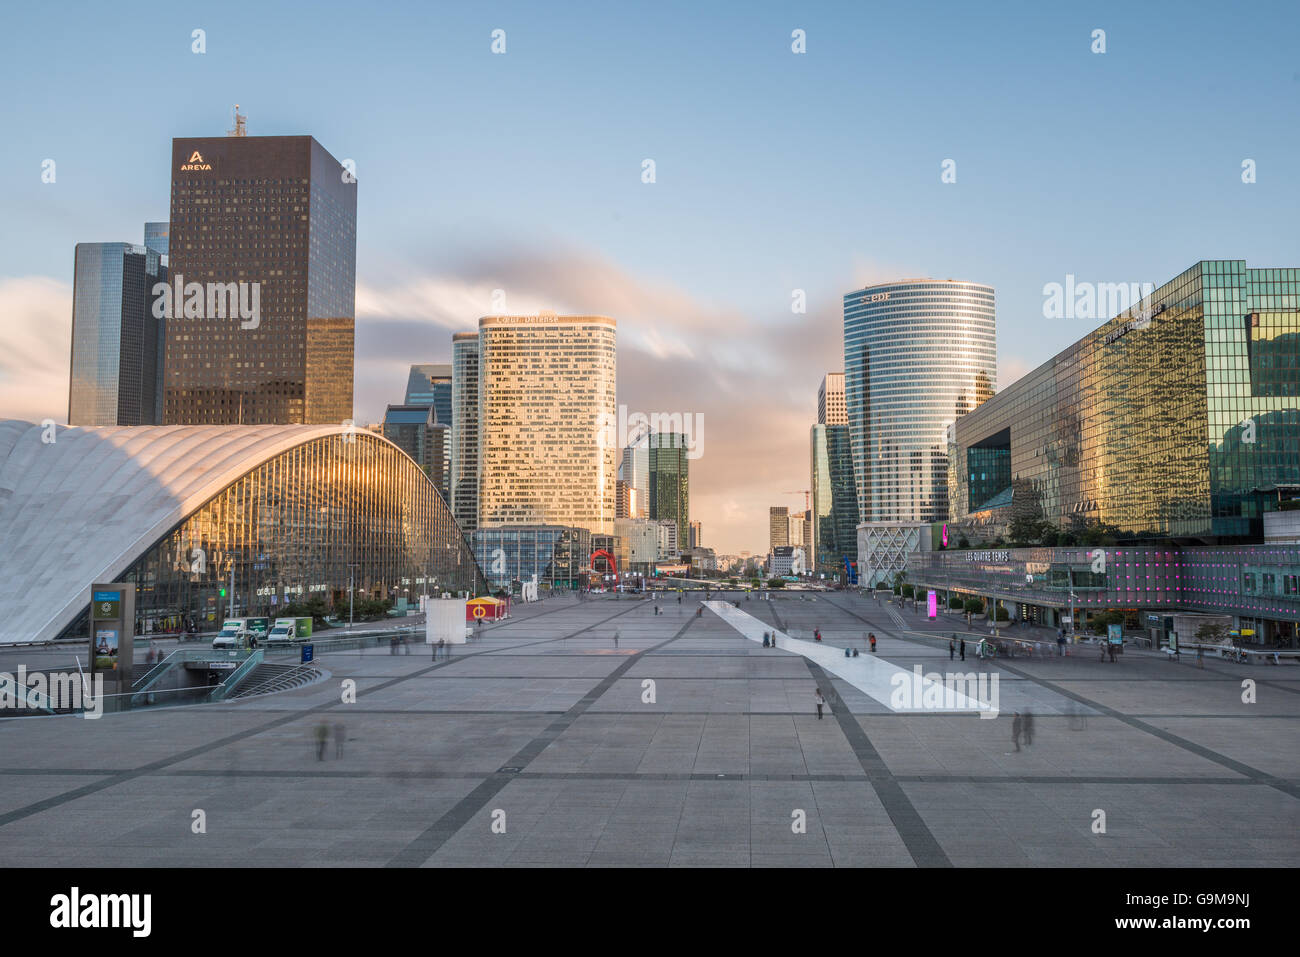 View of Business and Shopping district La Defense in Paris Stock Photo